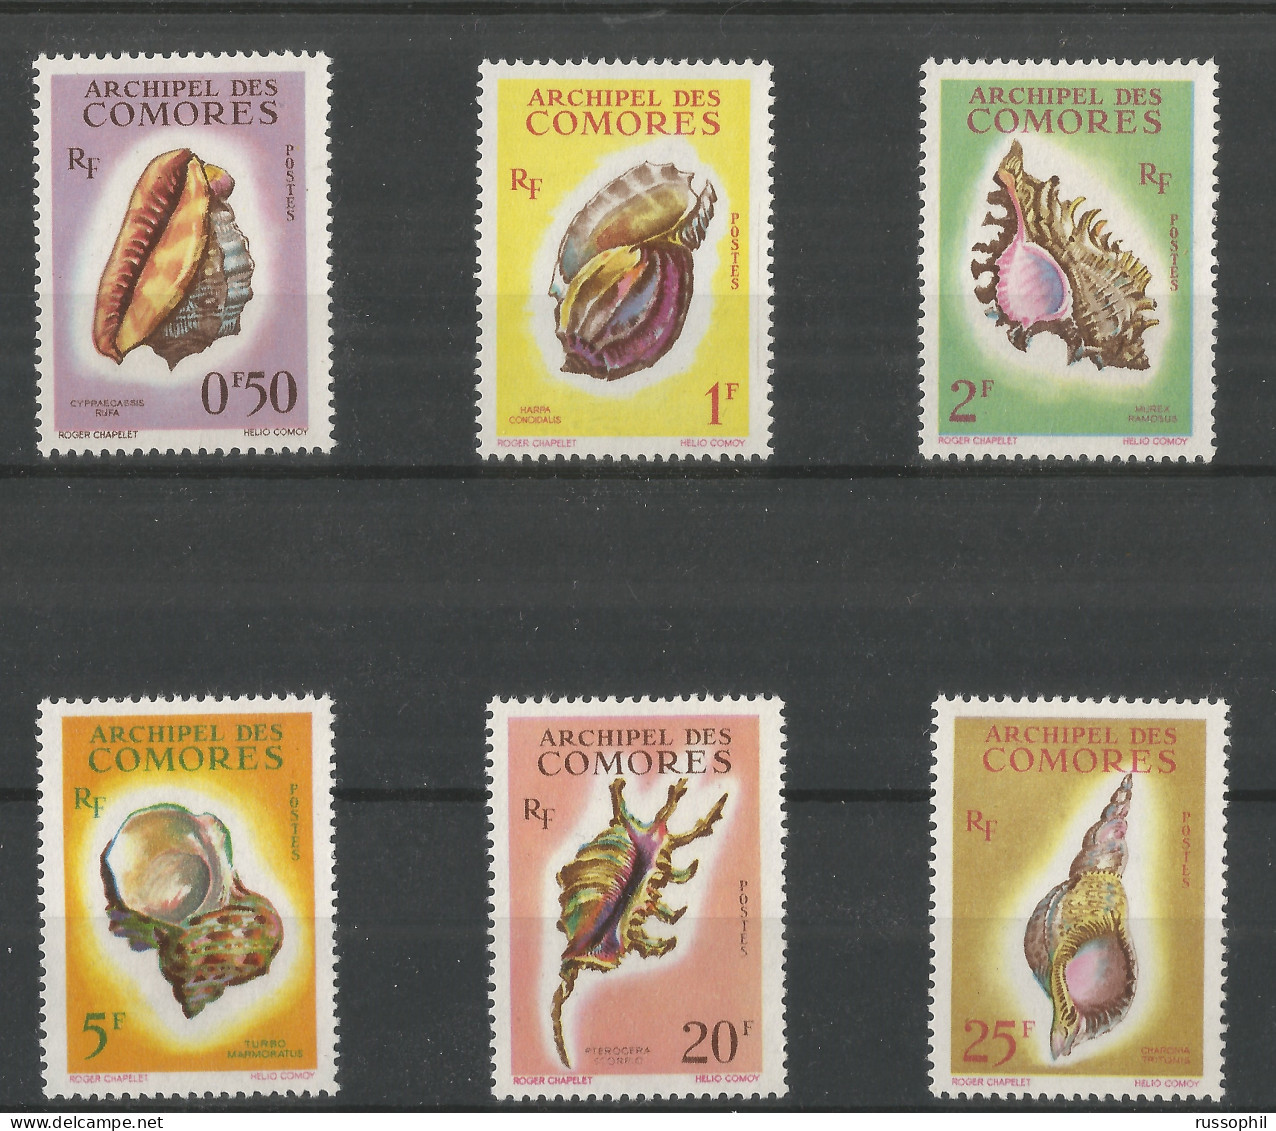 COMORES - COQUILLAGES -  SHELLFISH - Yv. #19 TO Yv. #24 -  (**/MNH) - 1962 - Nuevos